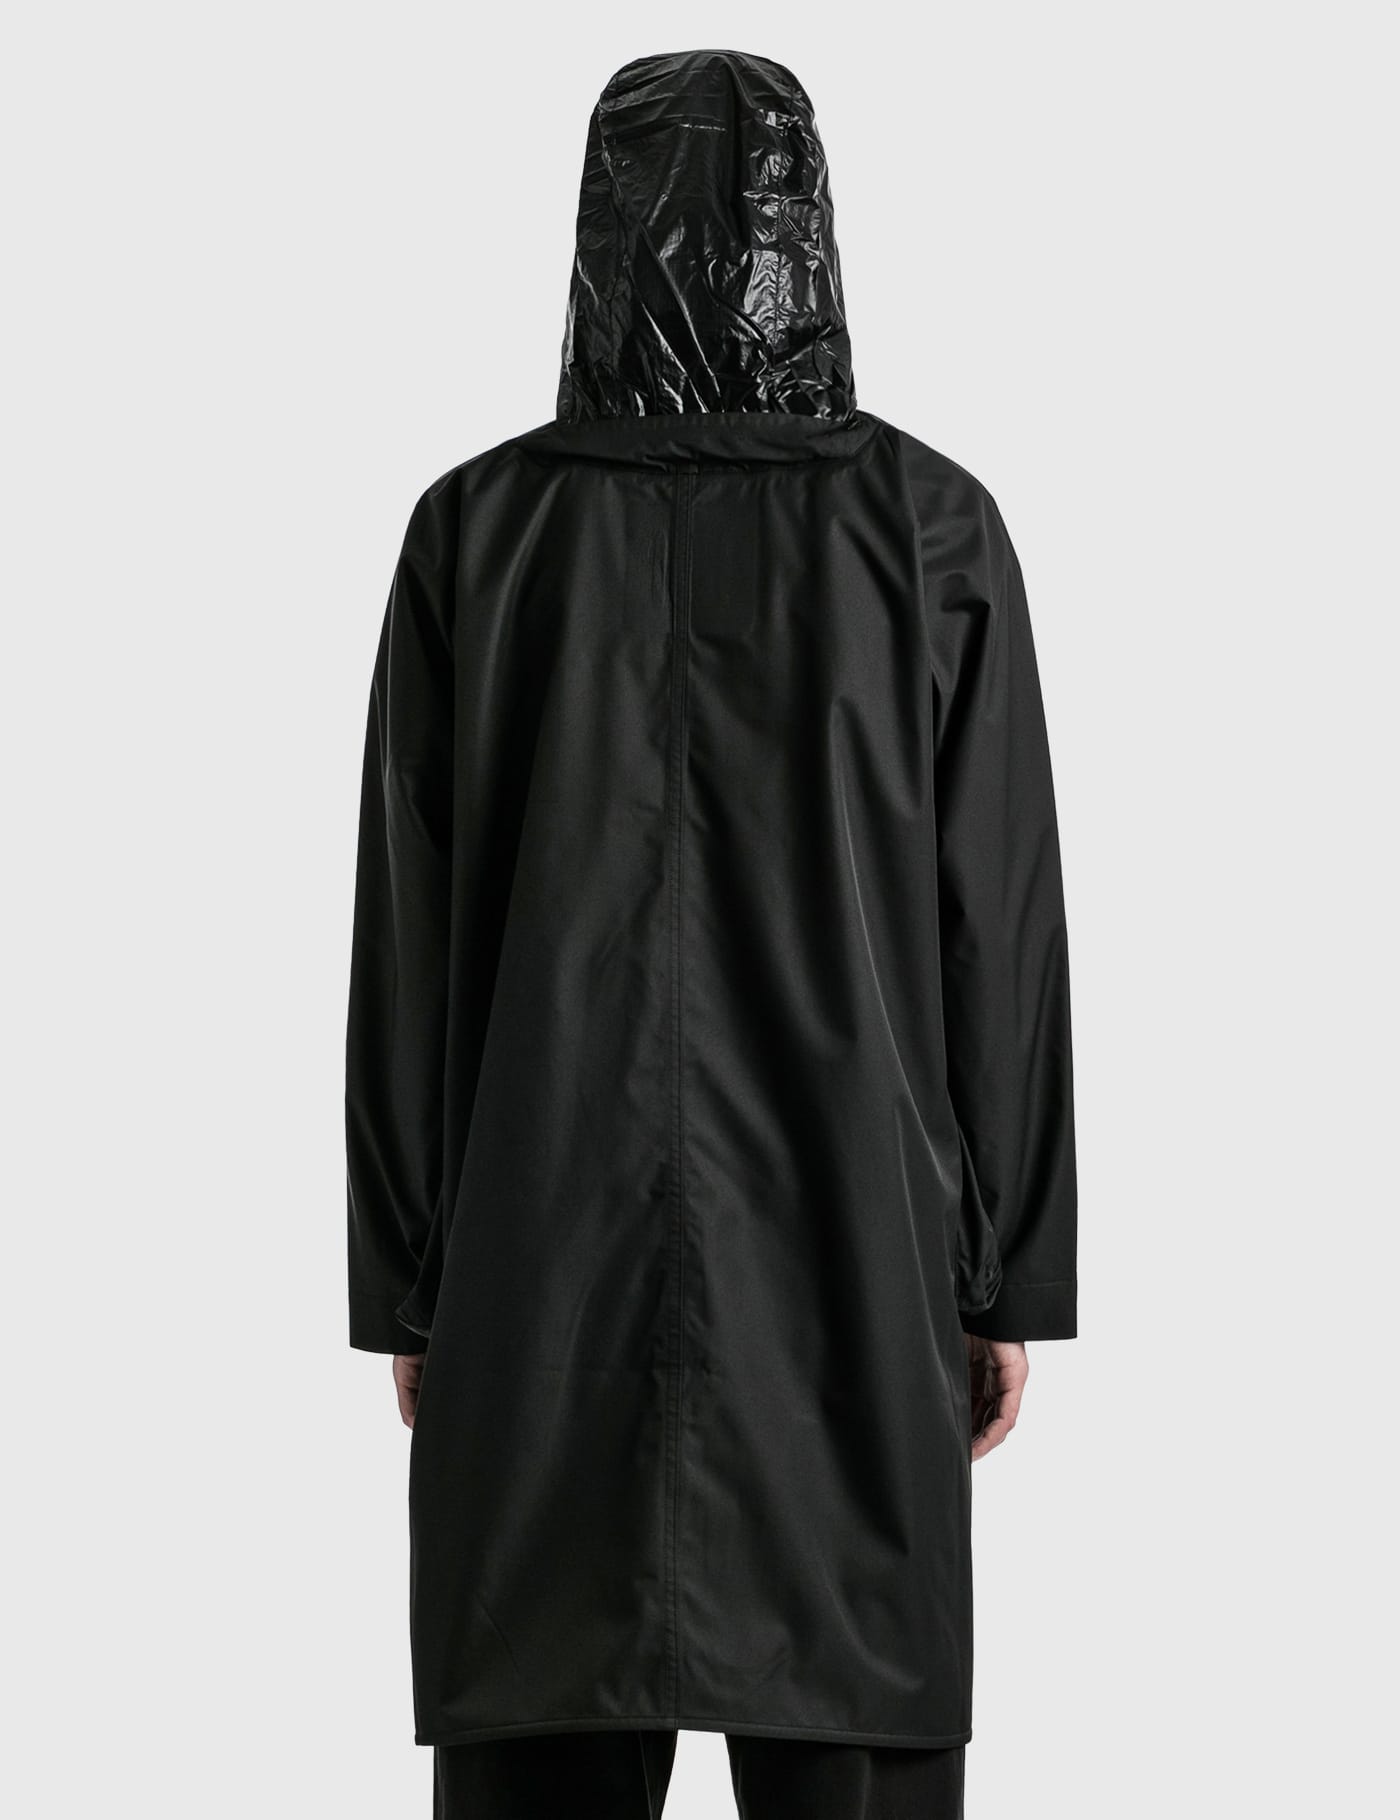 Comfy Outdoor Garment - Rain Falls Poncho | HBX - Globally Curated 